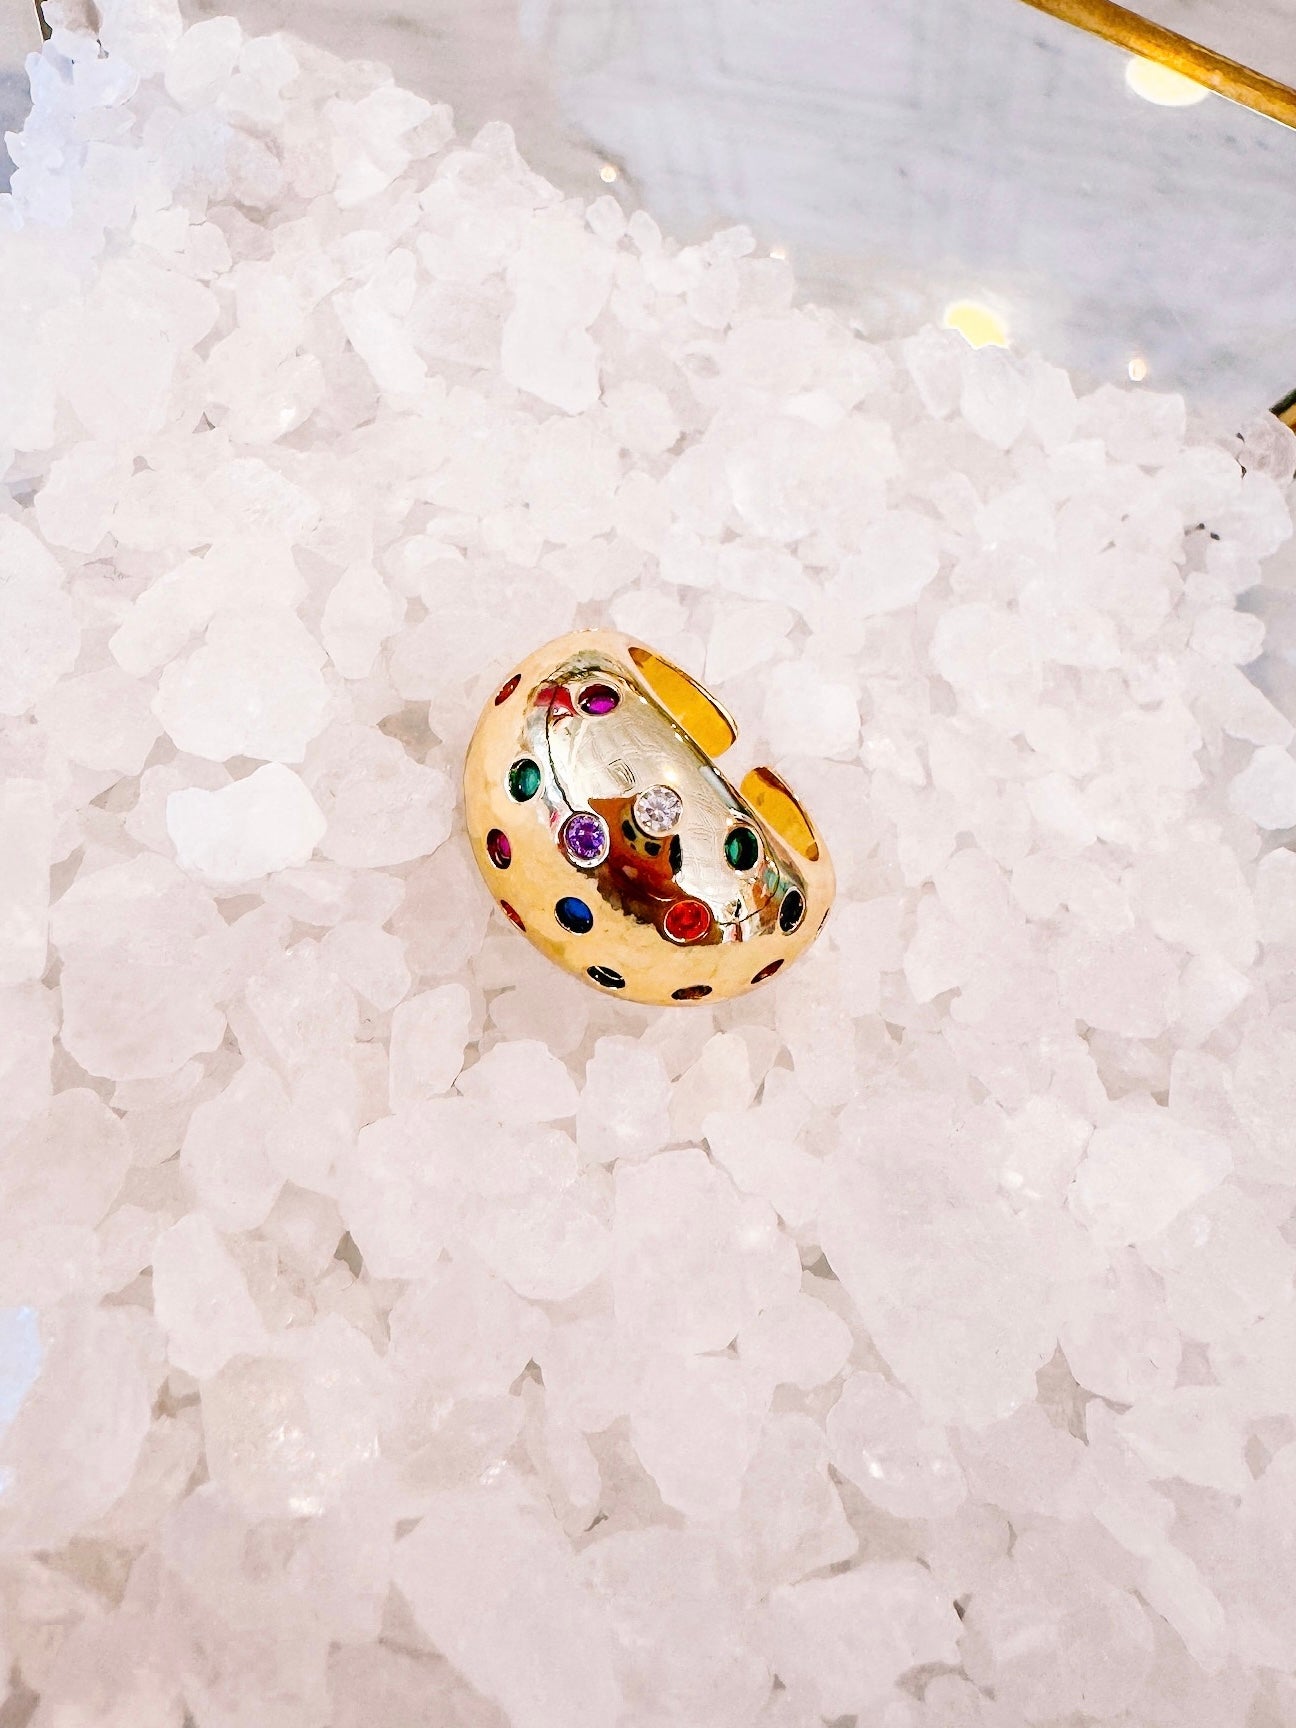 DOME RAINBOW CZ RING - GOLD